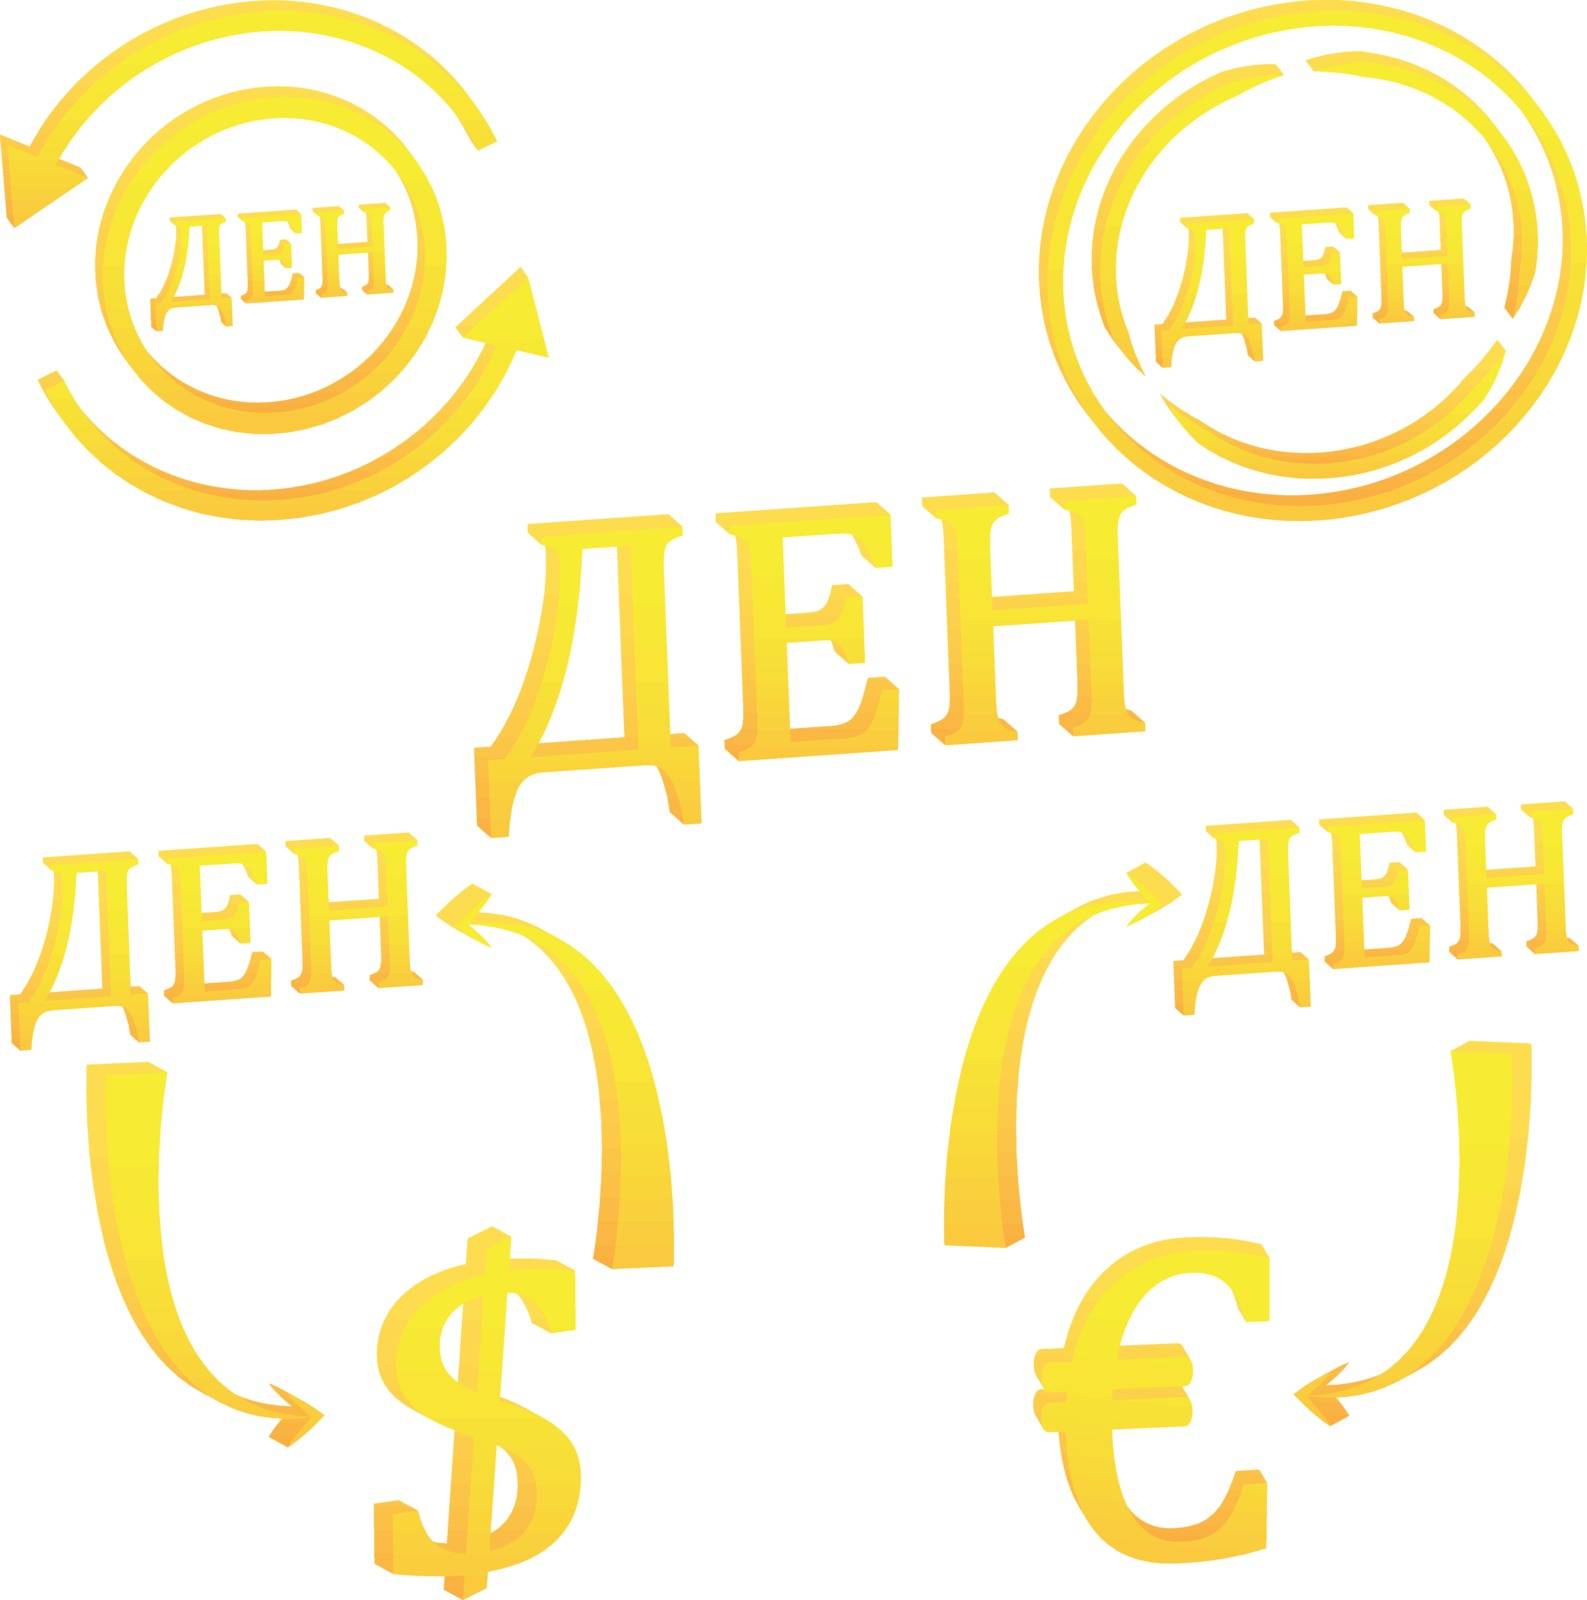 3D Makedonian Denar currency of Makedonia set symbol icon vector illustration on a white background